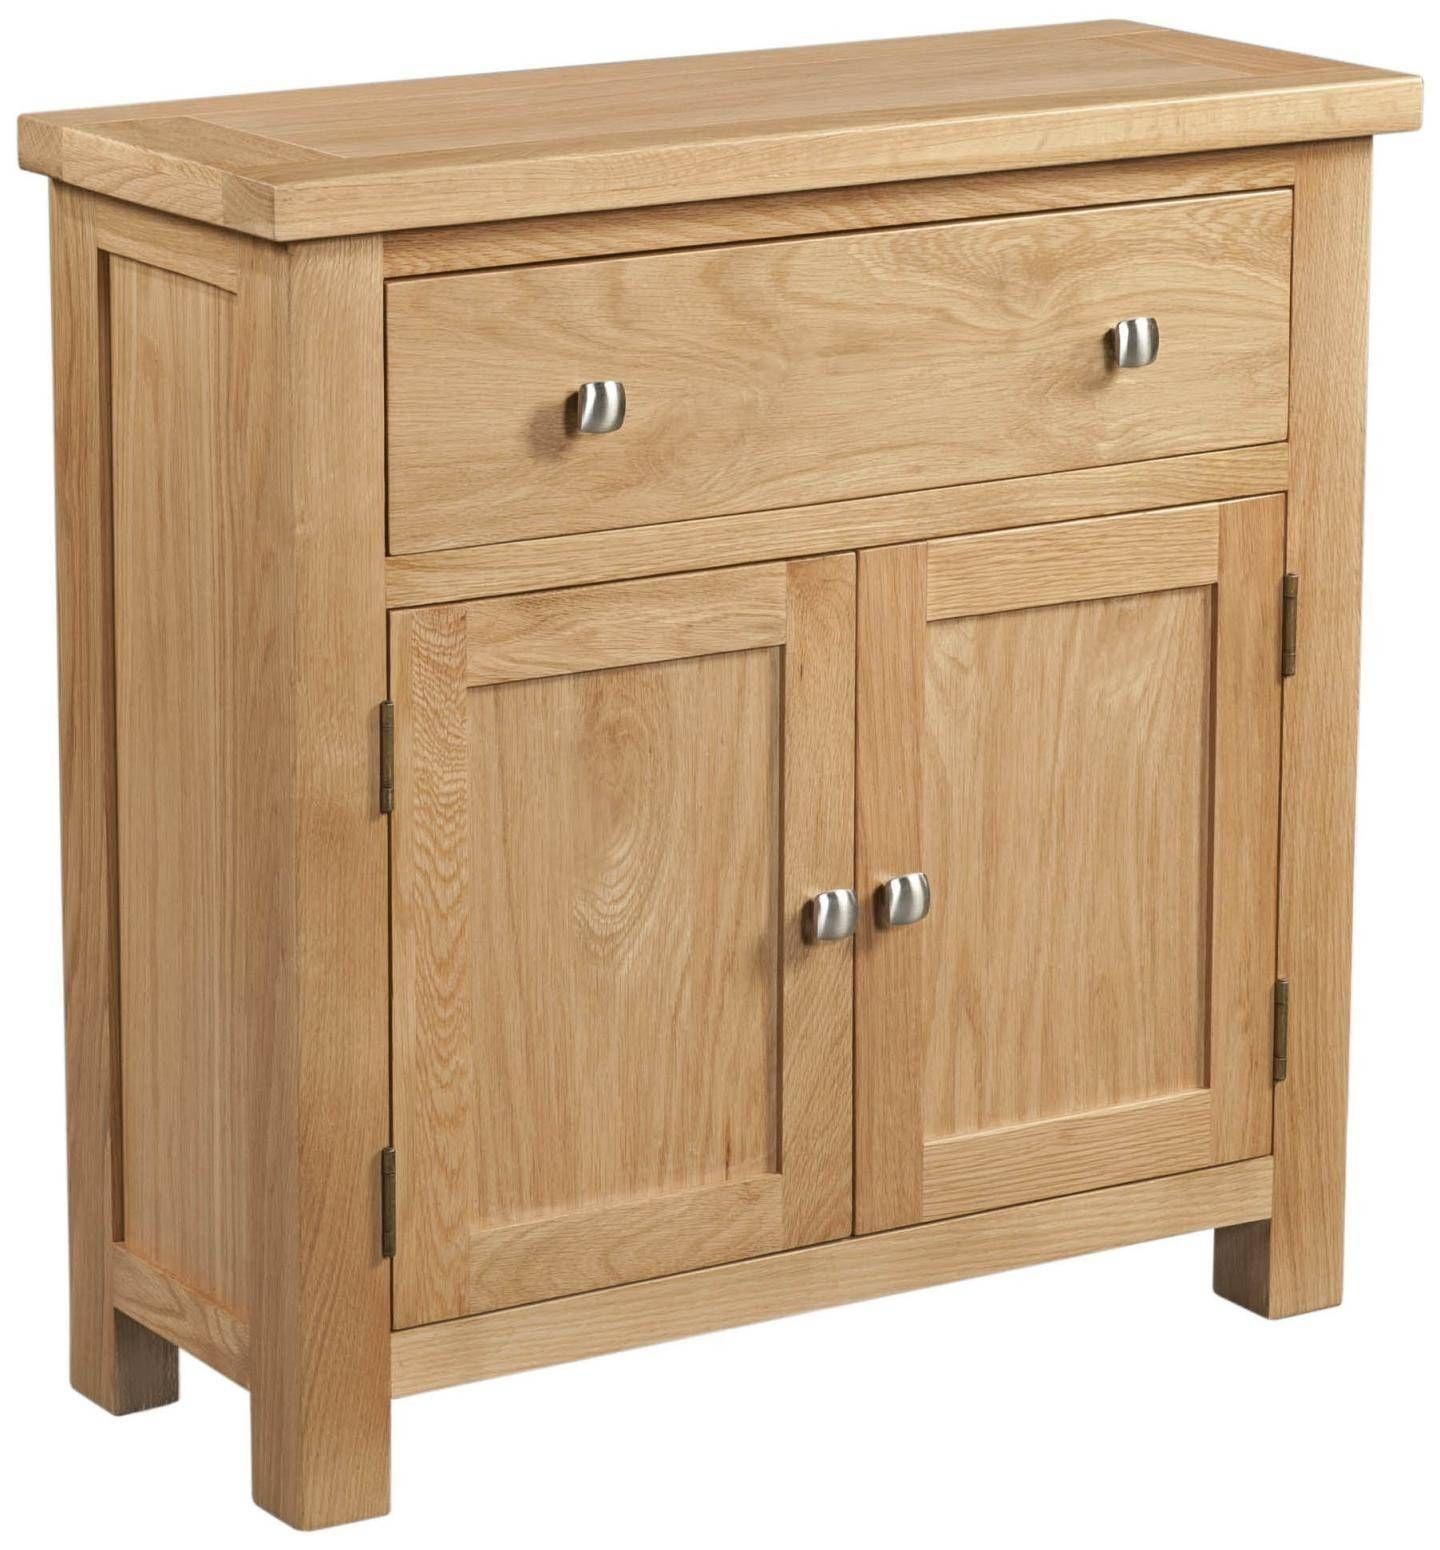 Lovely Pine & Oak Sideboards | Willoby's Furniture Swindon, Wiltshire With Small Sideboards (View 7 of 30)